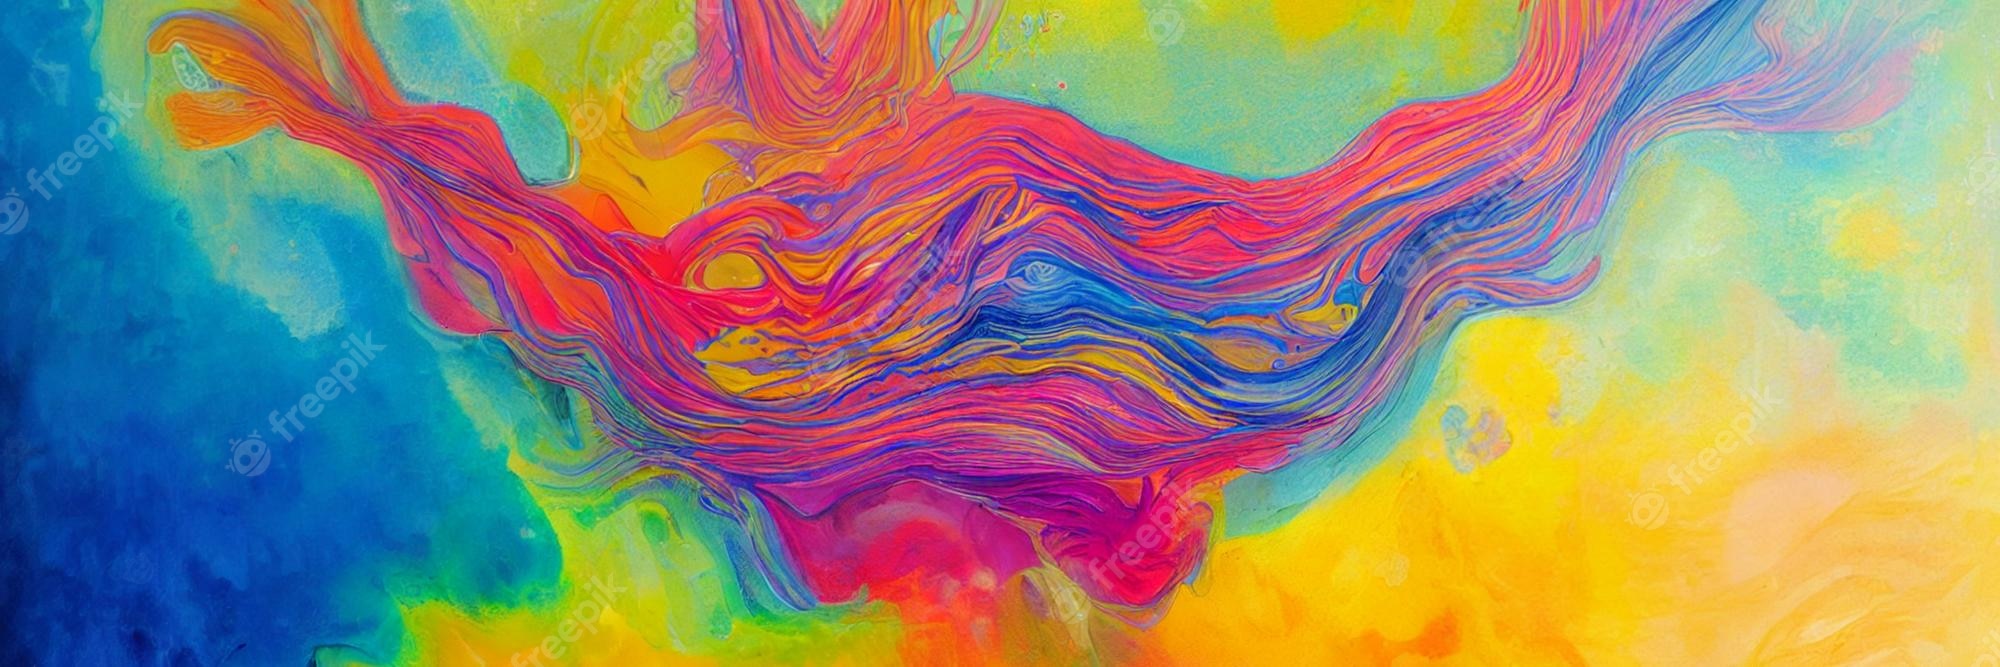 A colorful abstract painting with swirling lines in red, blue, and yellow. - Alien